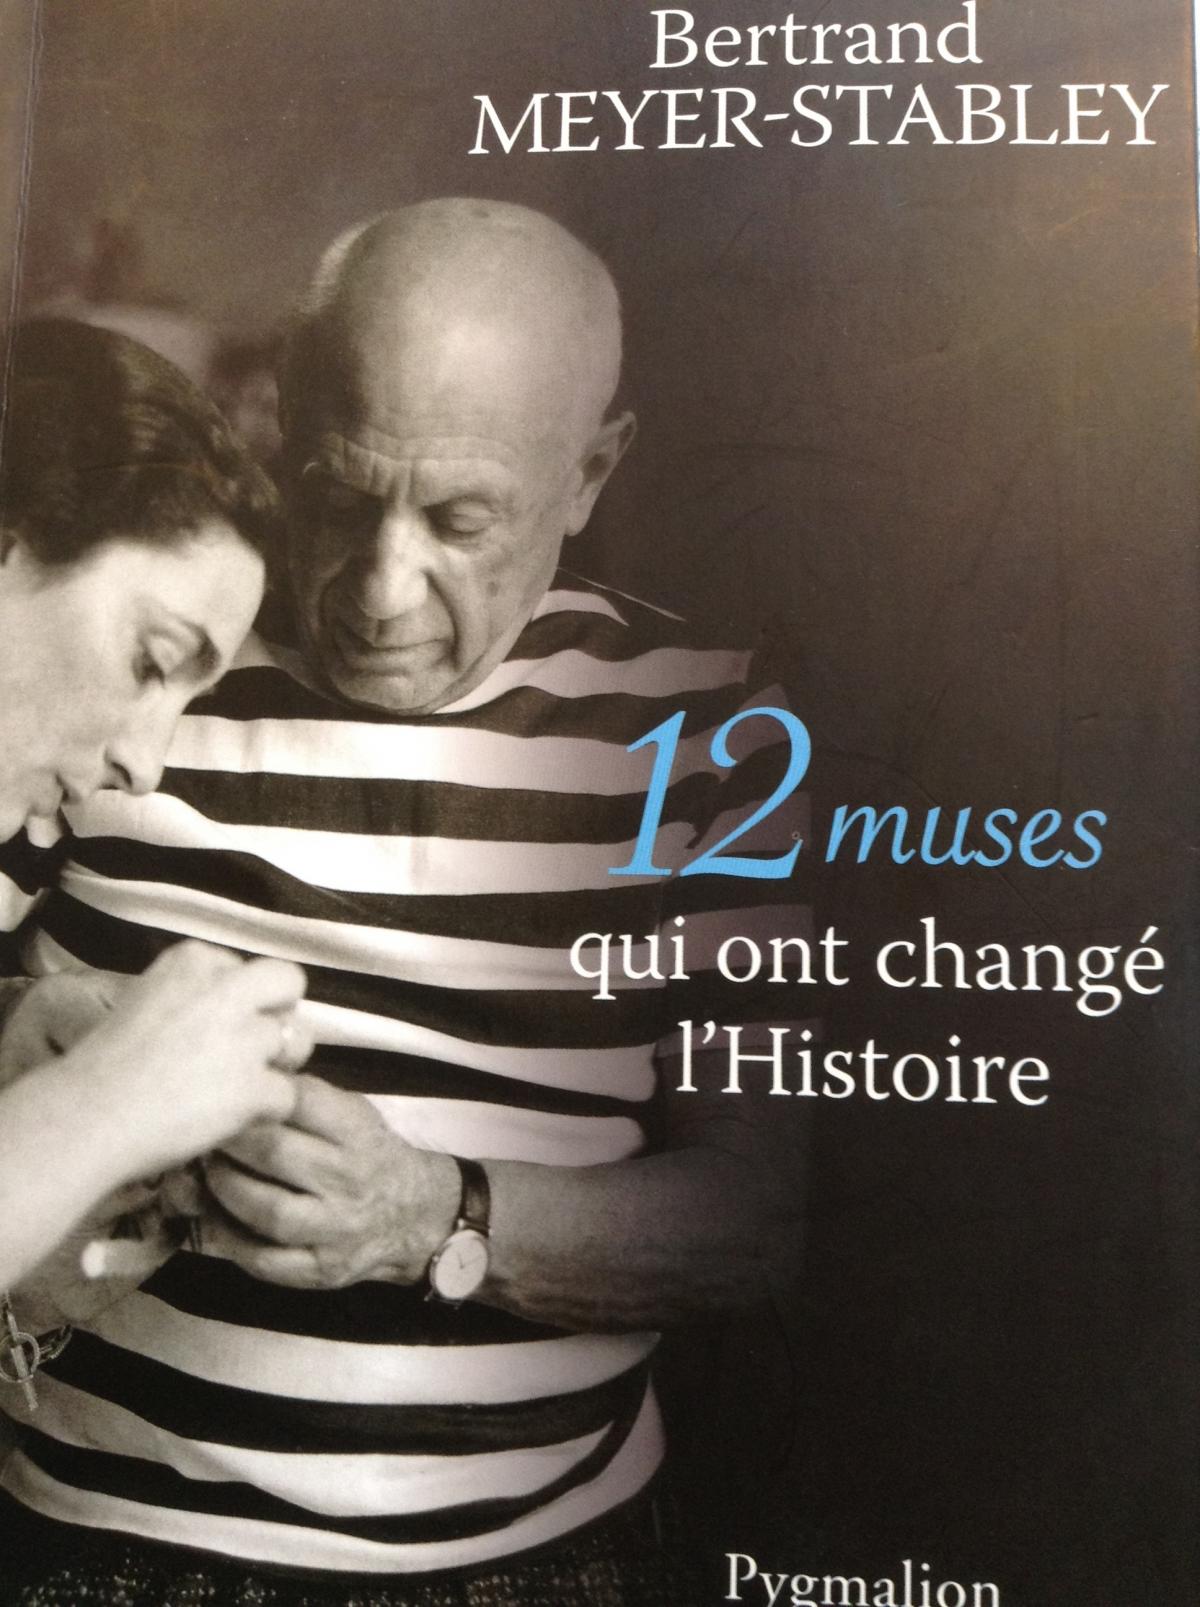 Twelve Muses qui ont changé l'Histoire, by Bertrand Meyer-Stabley, edited by Pygmalion